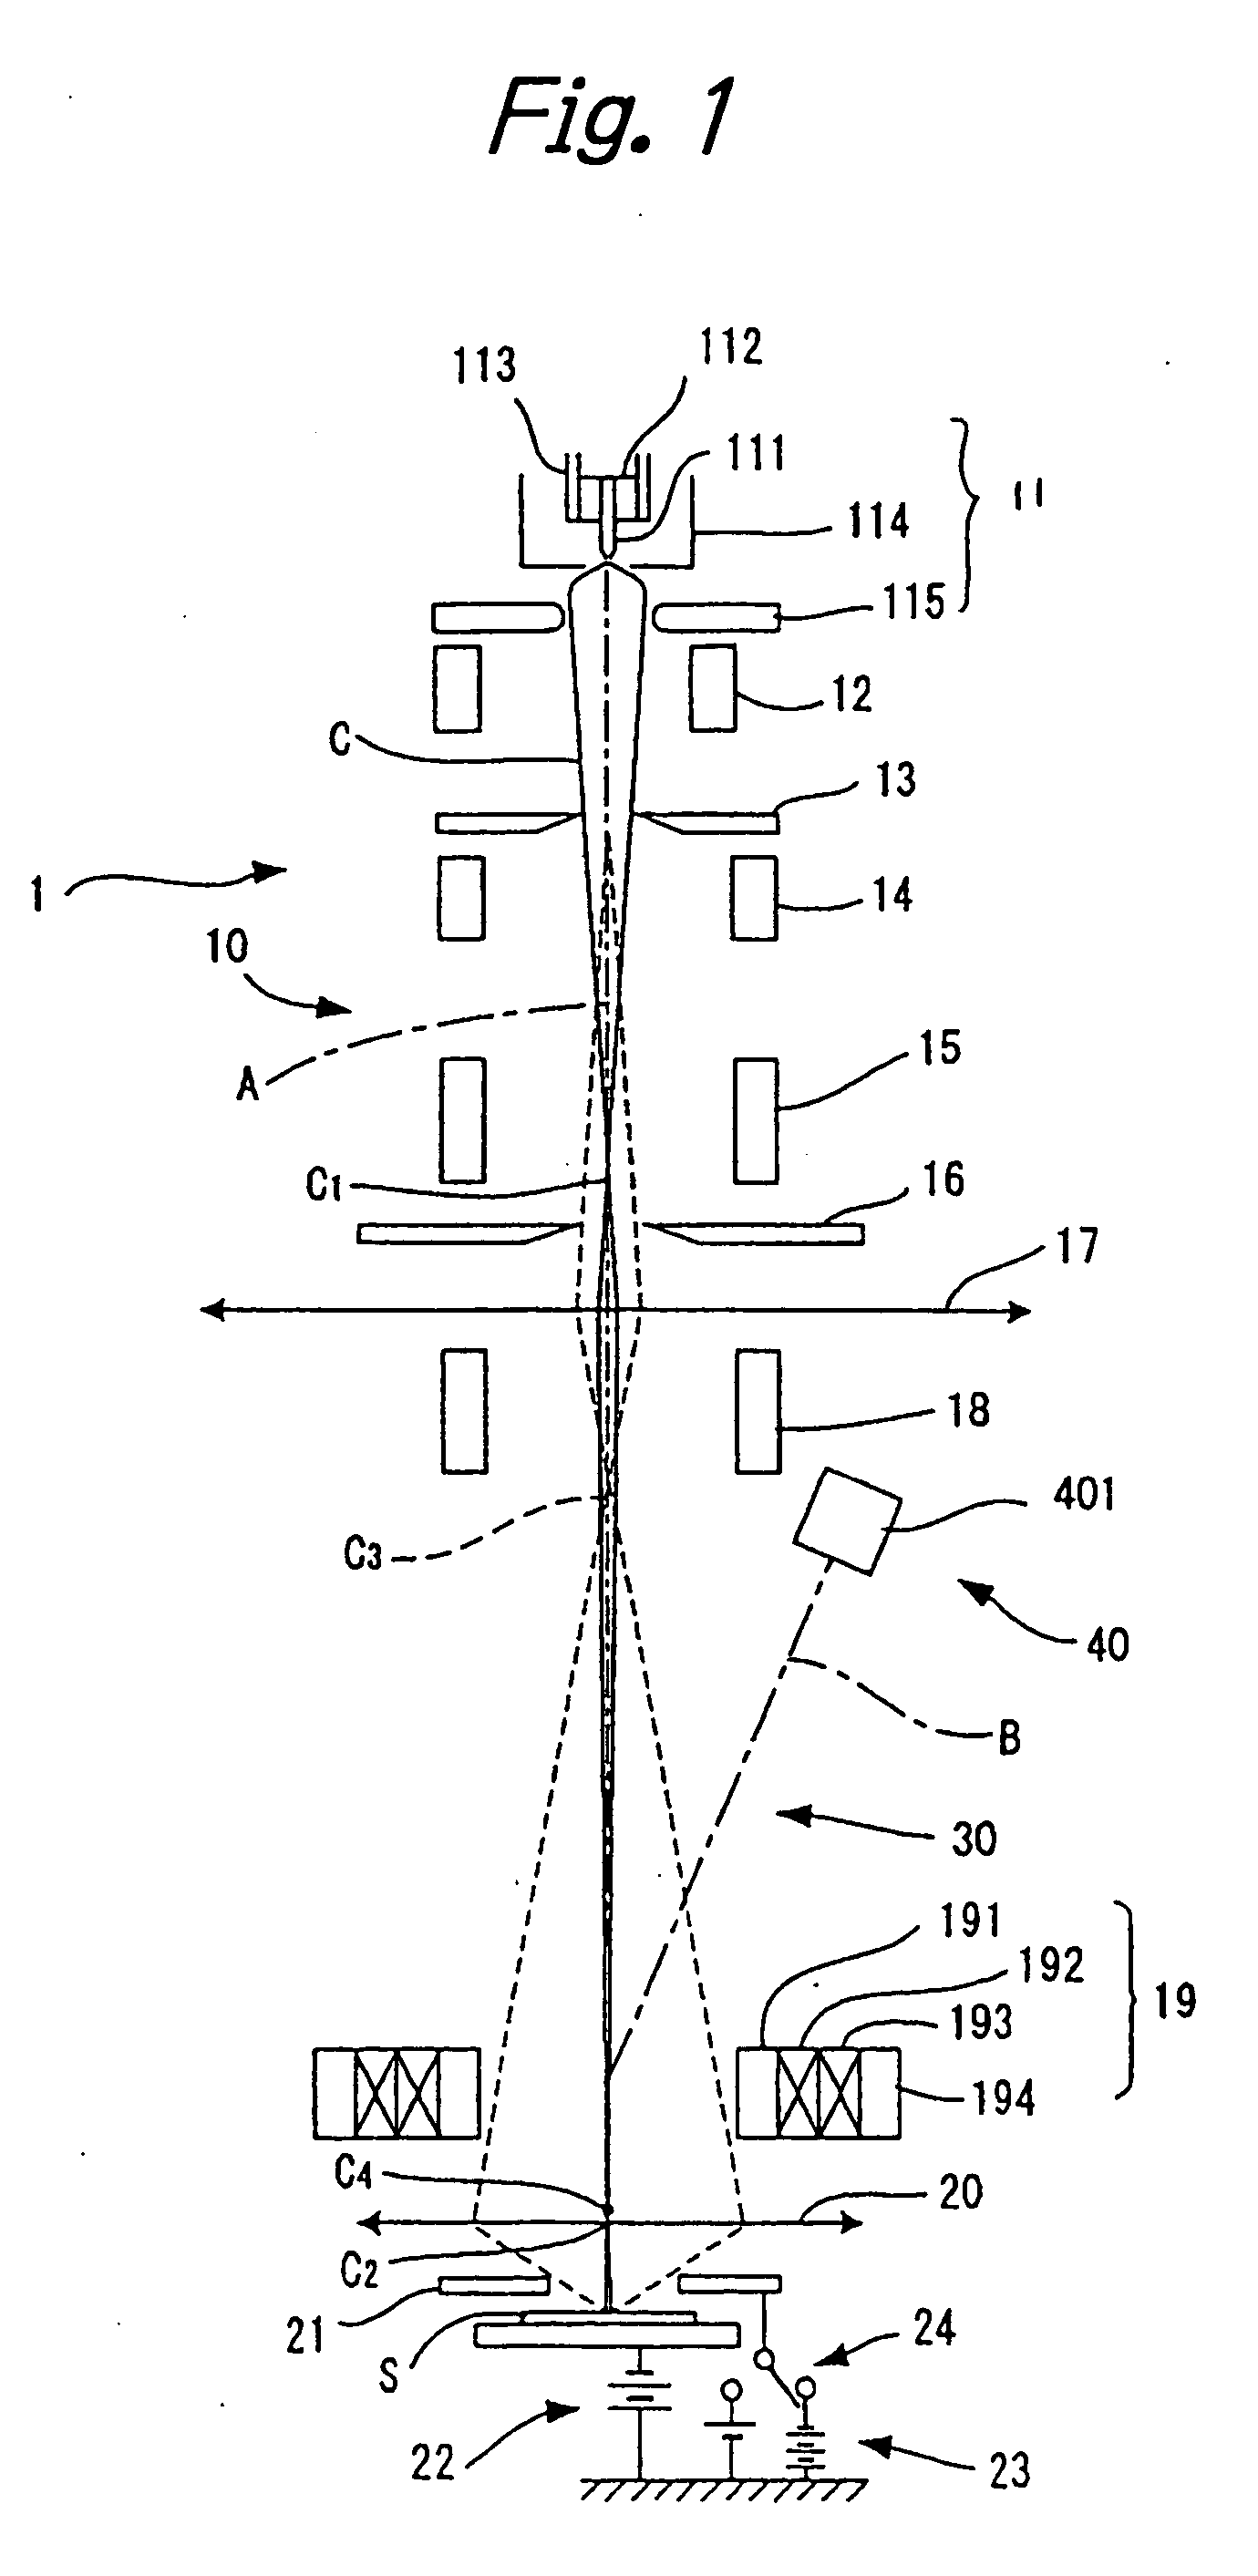 Electron beam system and method of manufacturing devices using the system